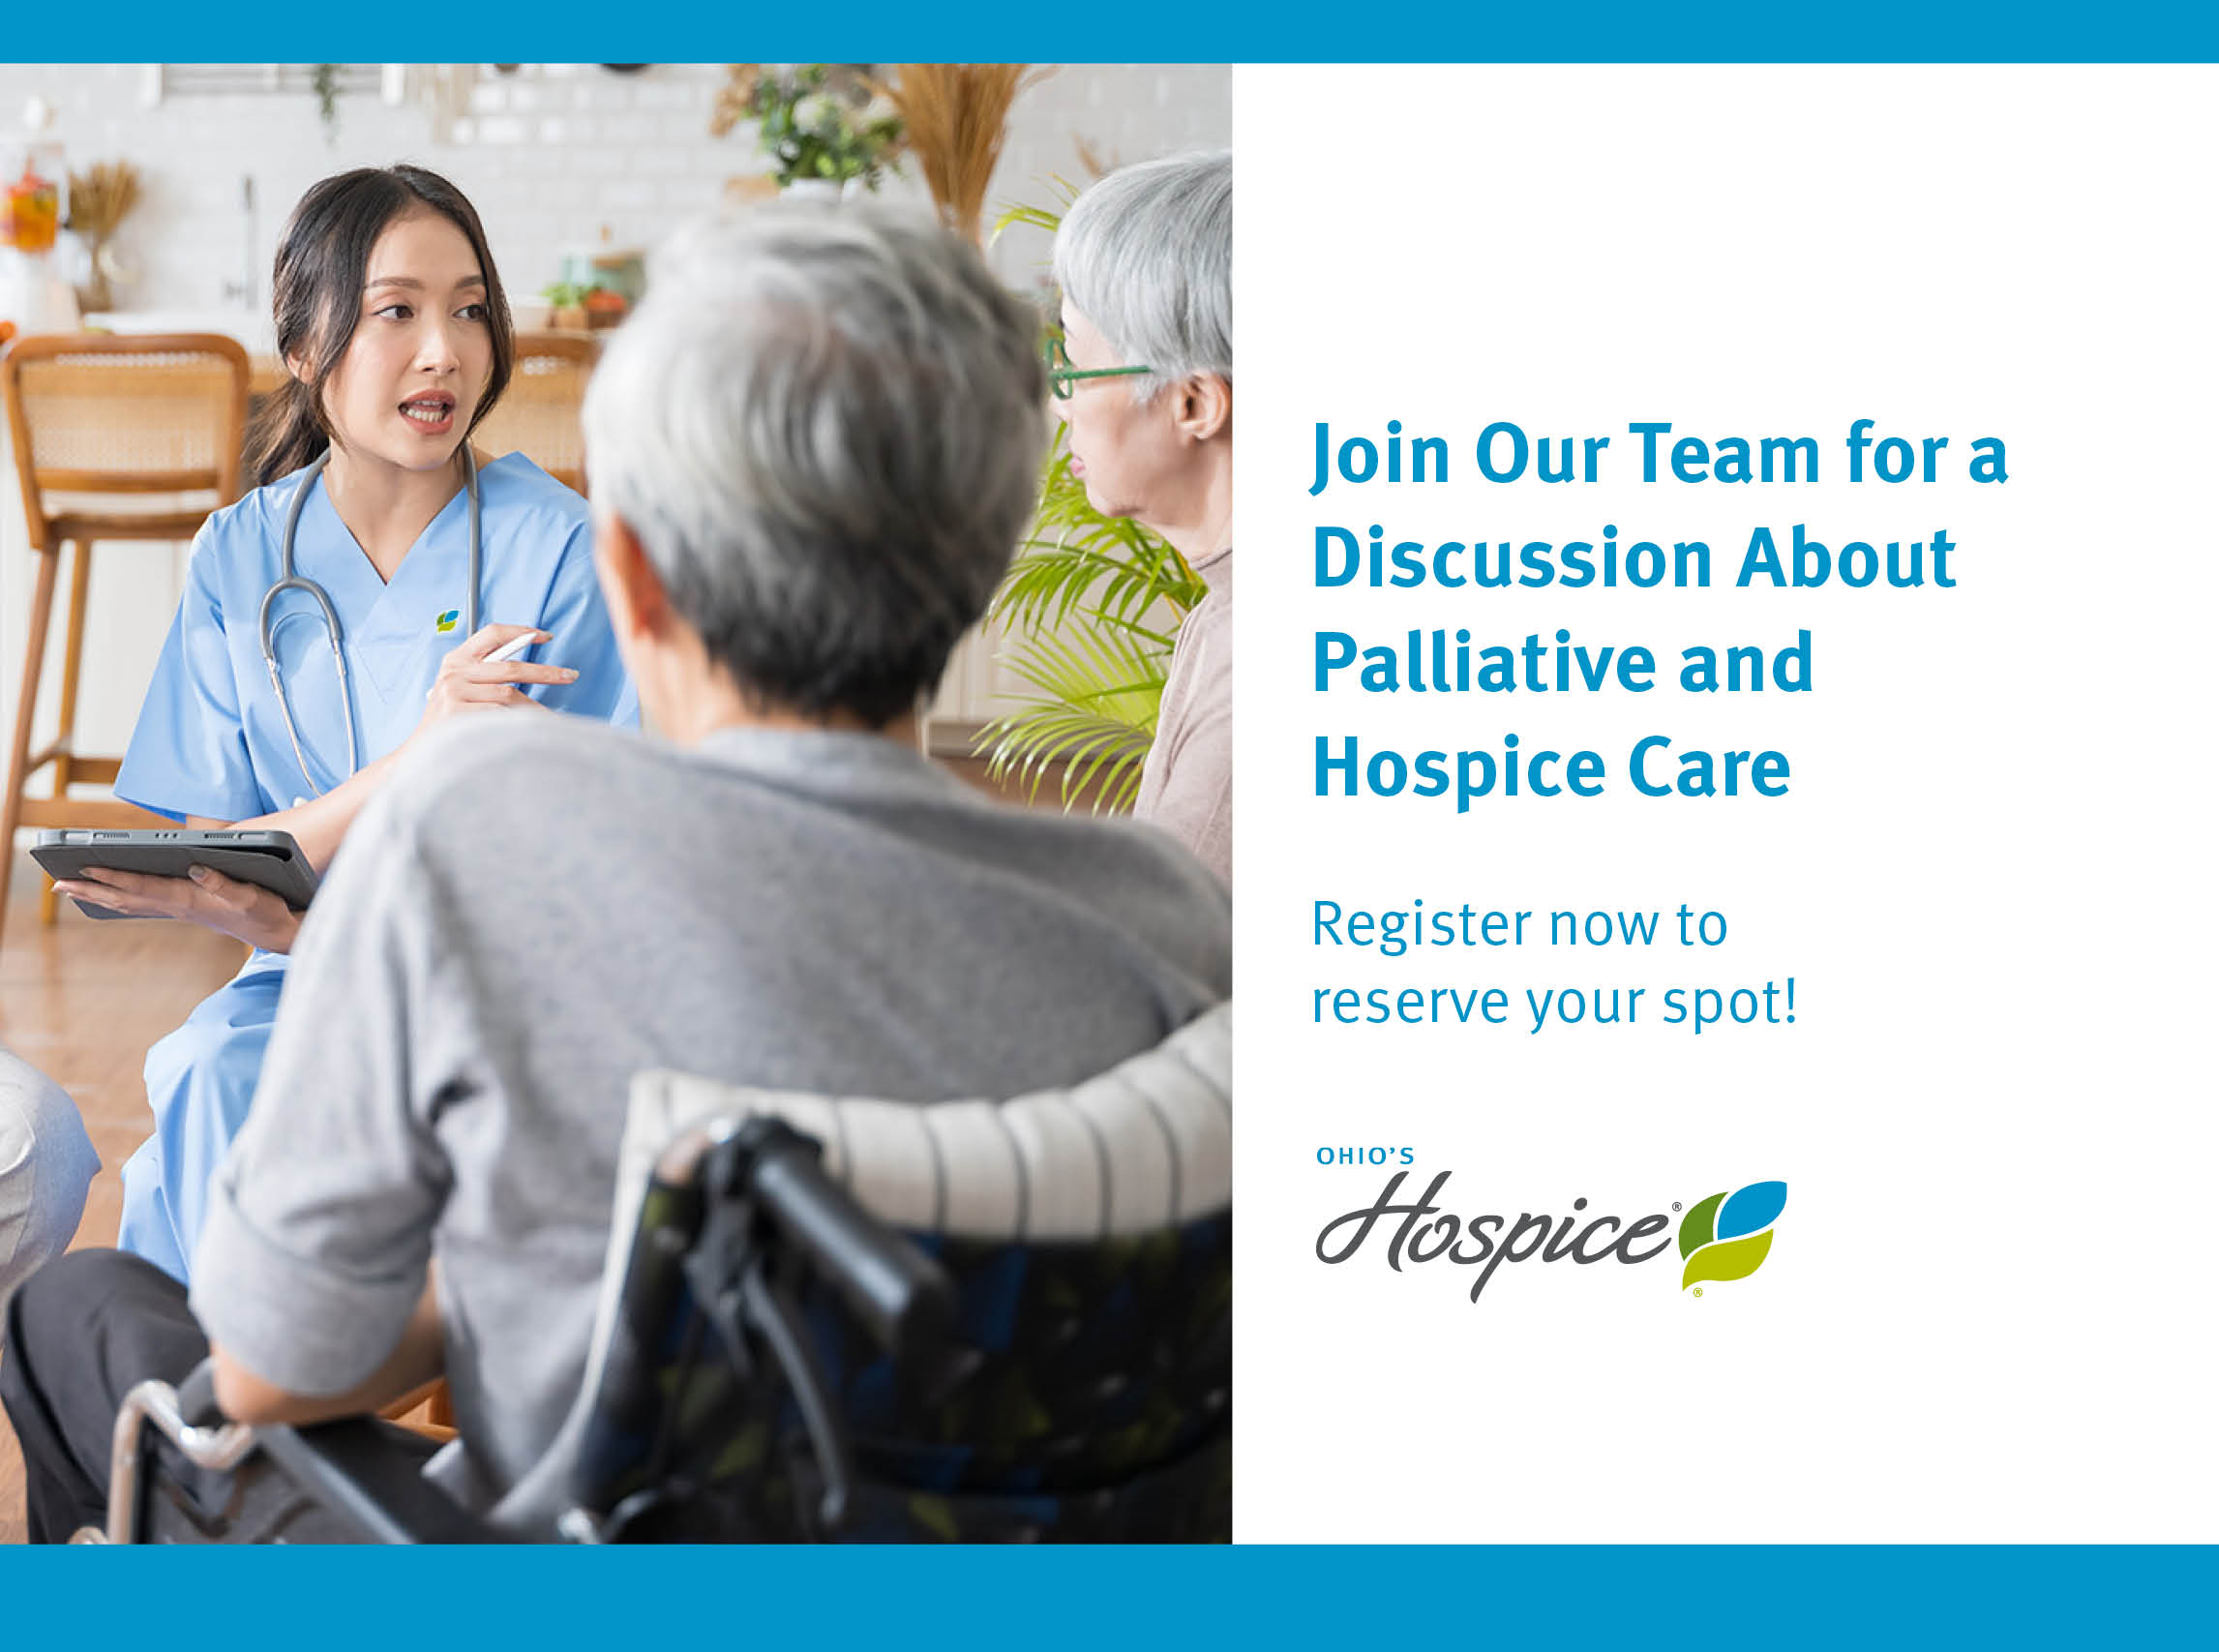 Join Our Team for a Discussion About Palliative and Hospice Care: Register now to reserve your spot!